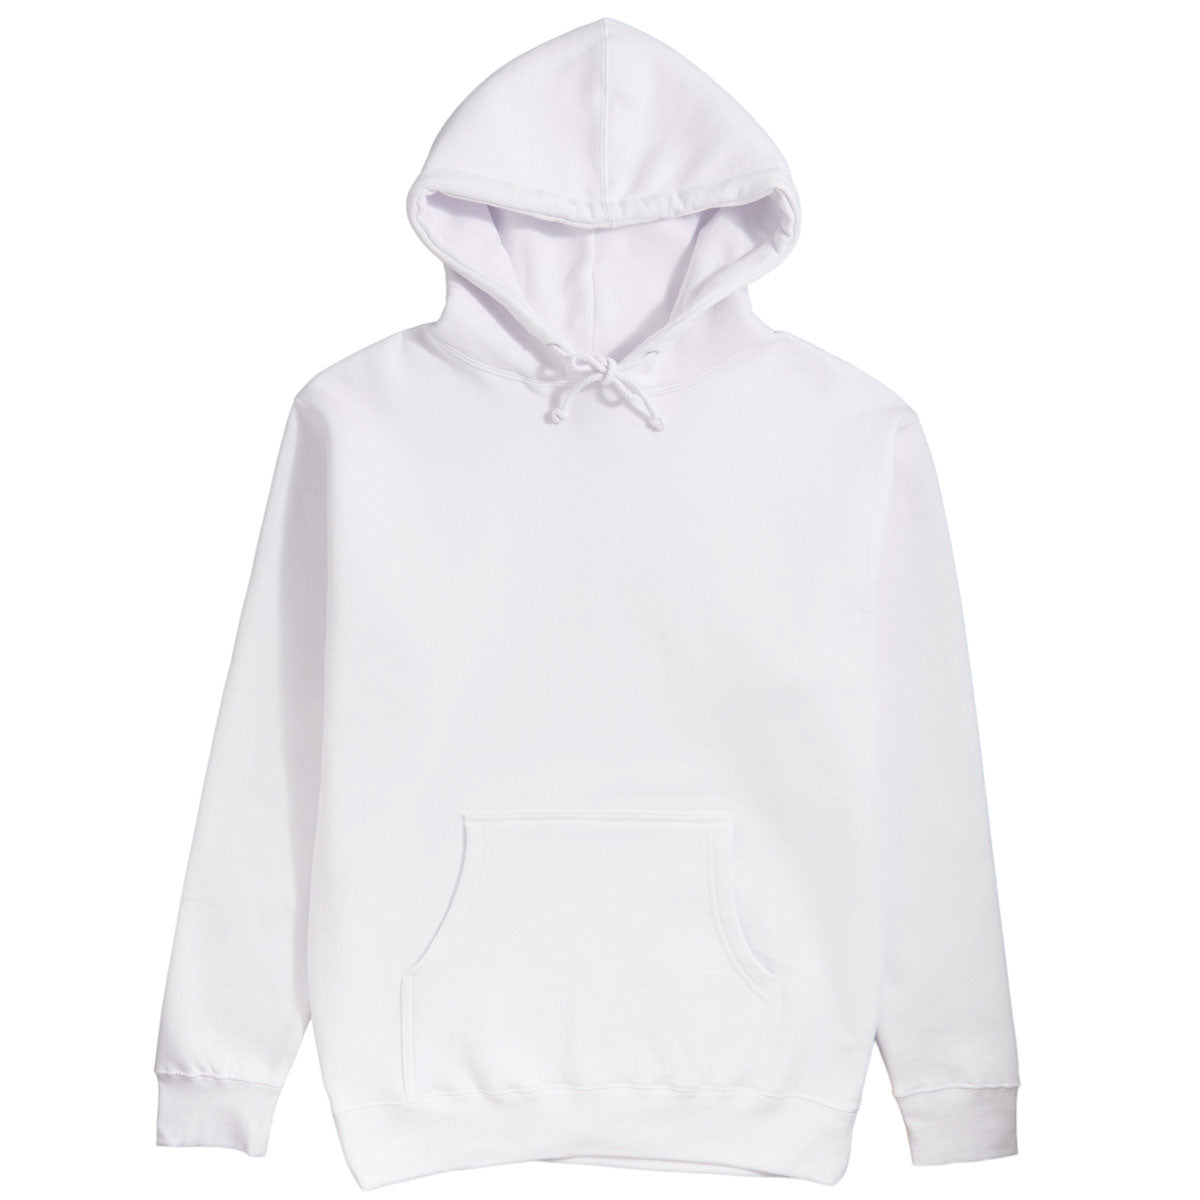 Converse Body Horror Pullover Hoodie - White - XL image 1